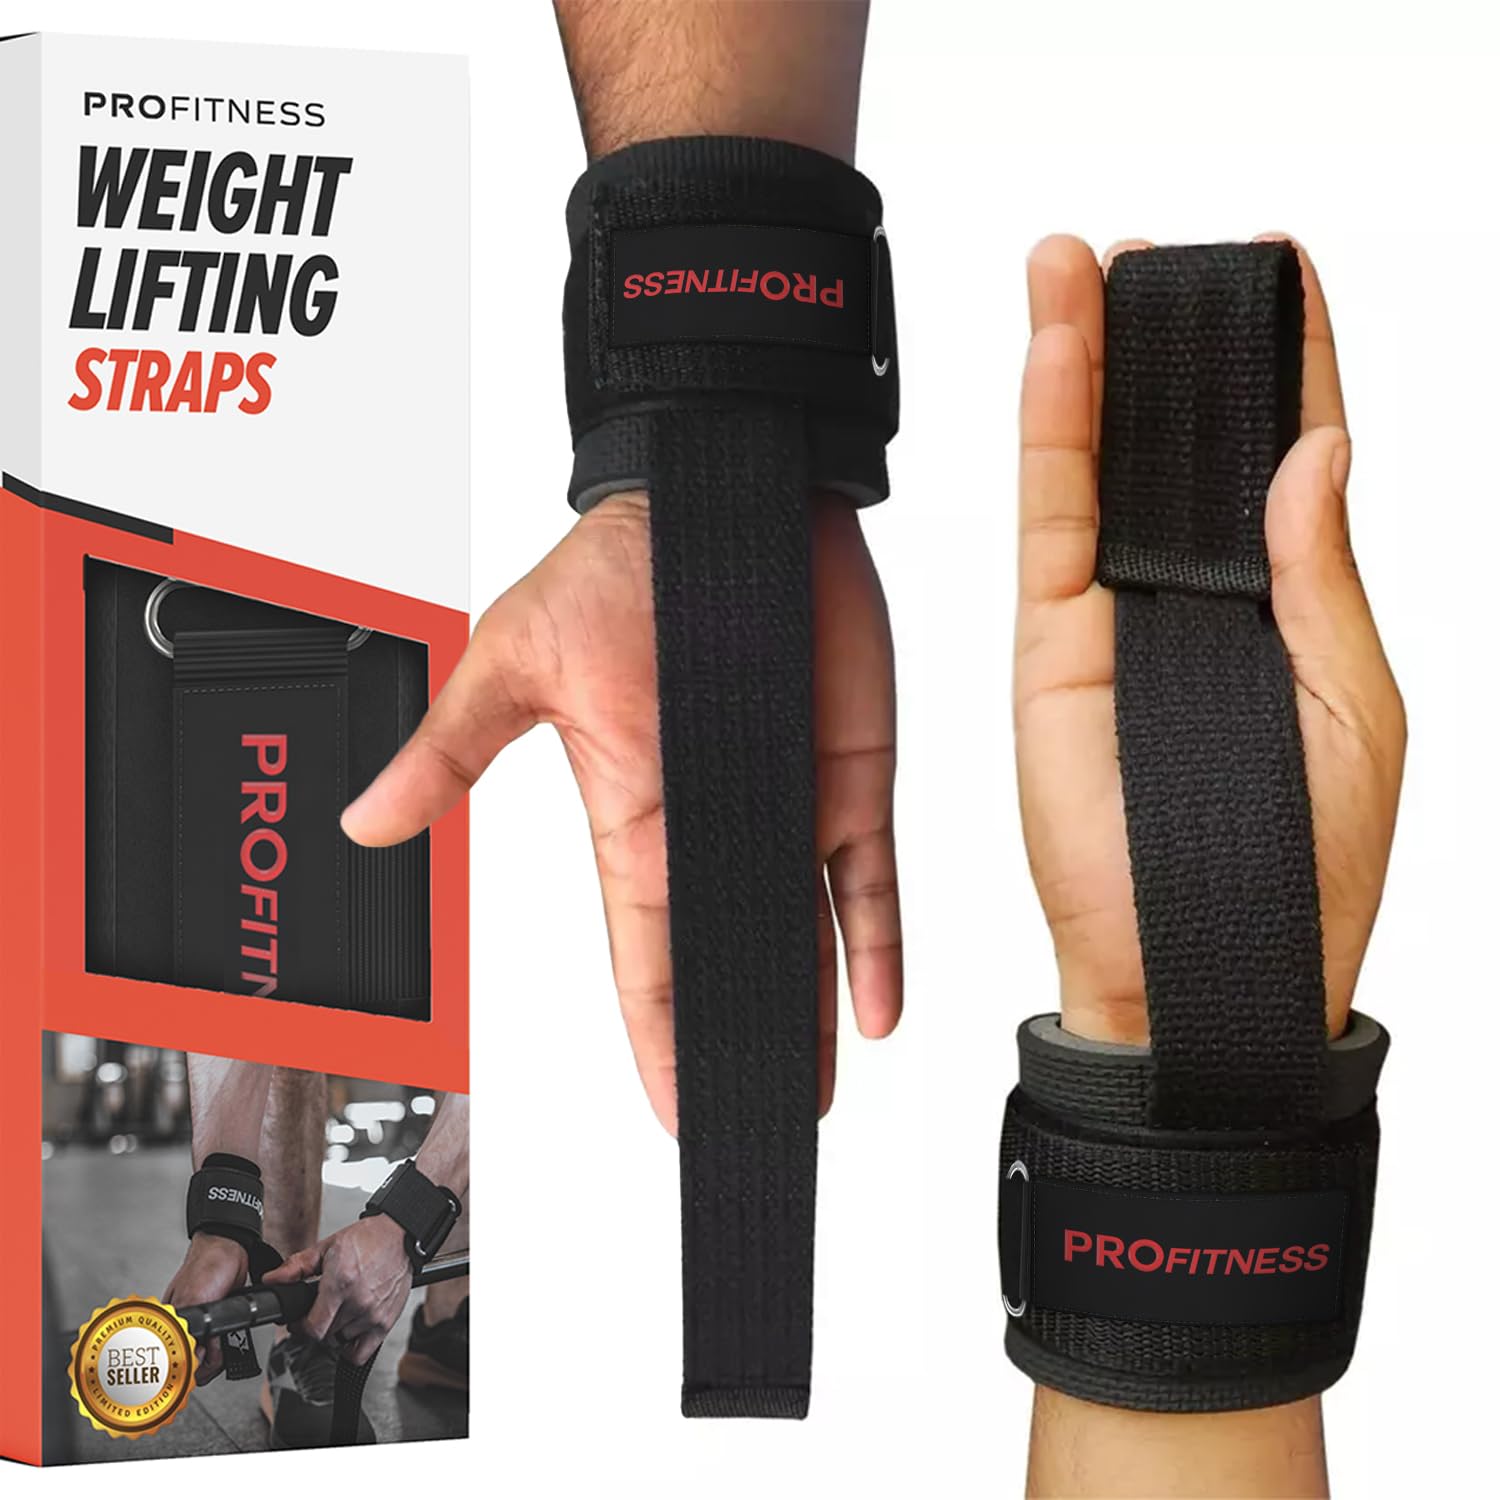 ProFitness Weight Lifting Straps - 10A Long Wrist Straps for